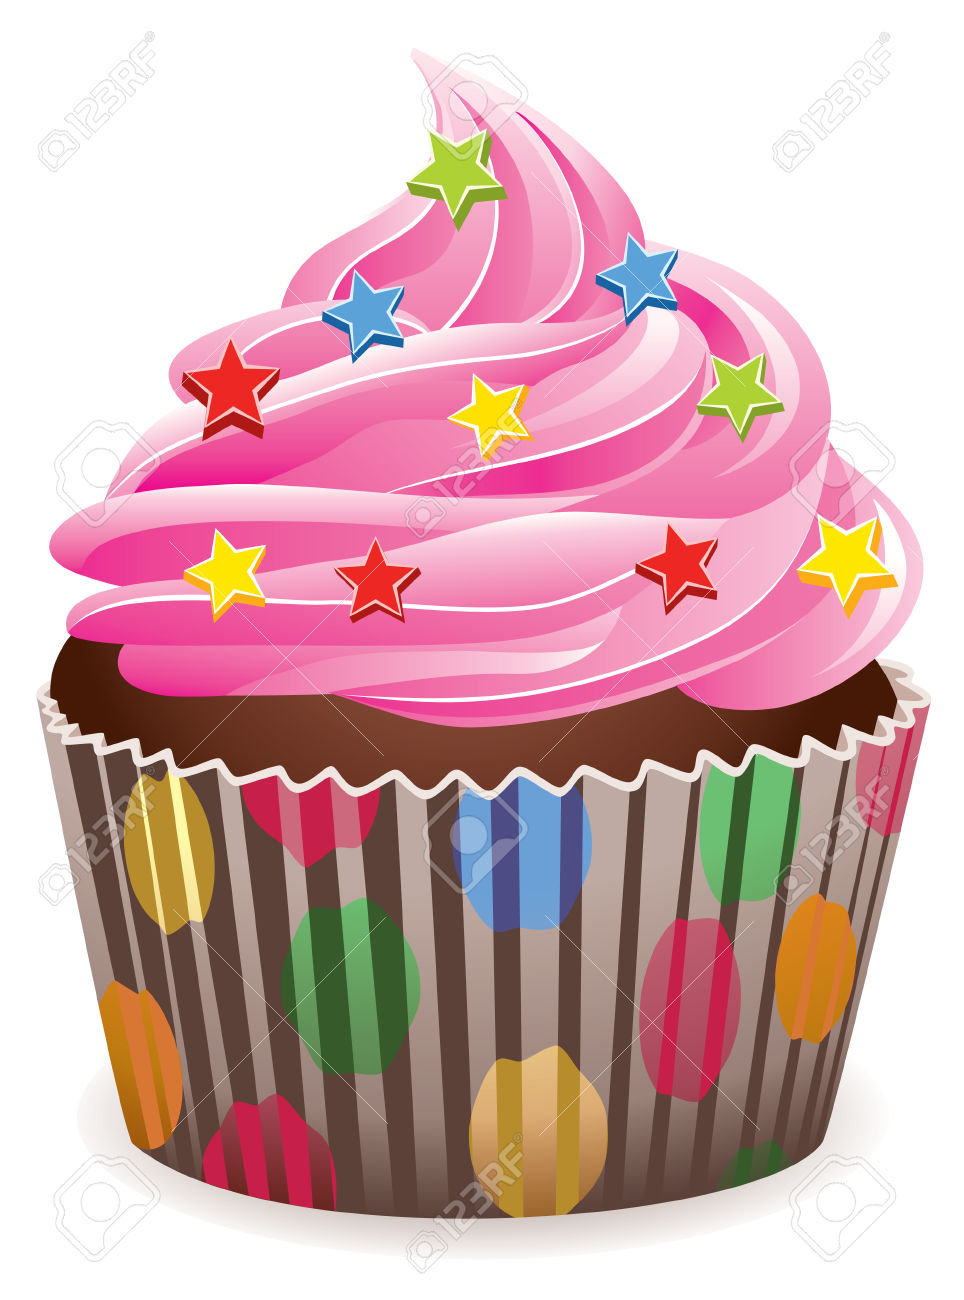 Cupcakes clipart fairy cake. Station 